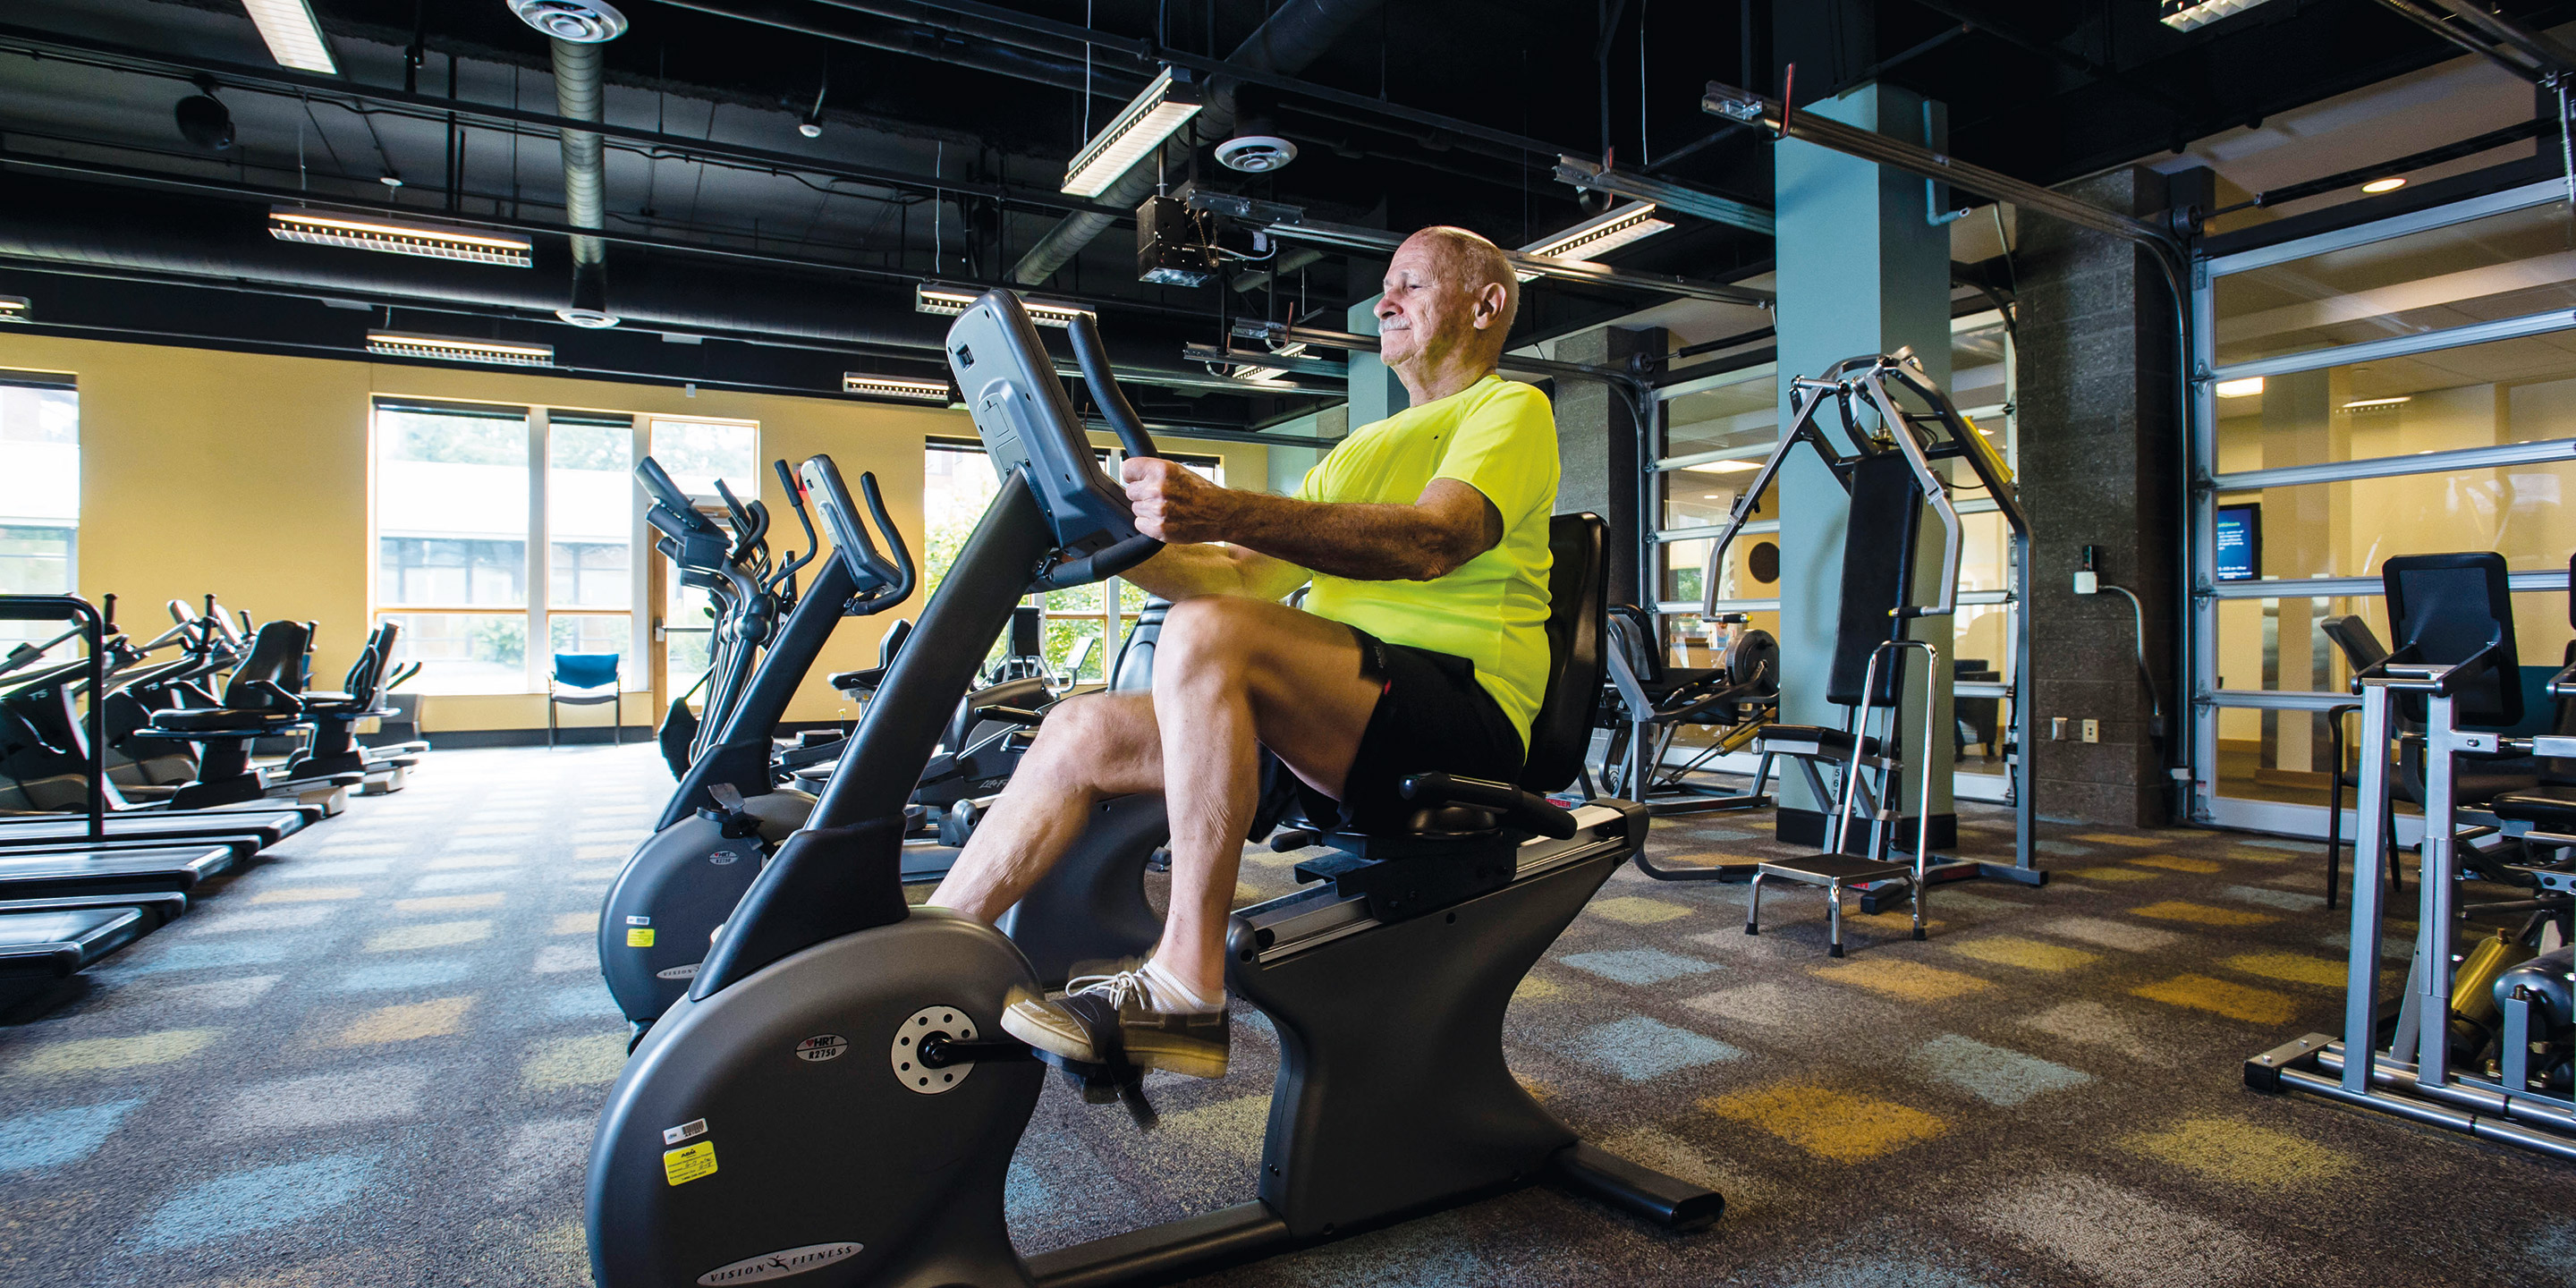 A male resident works out on a stationary exercise bicycle.